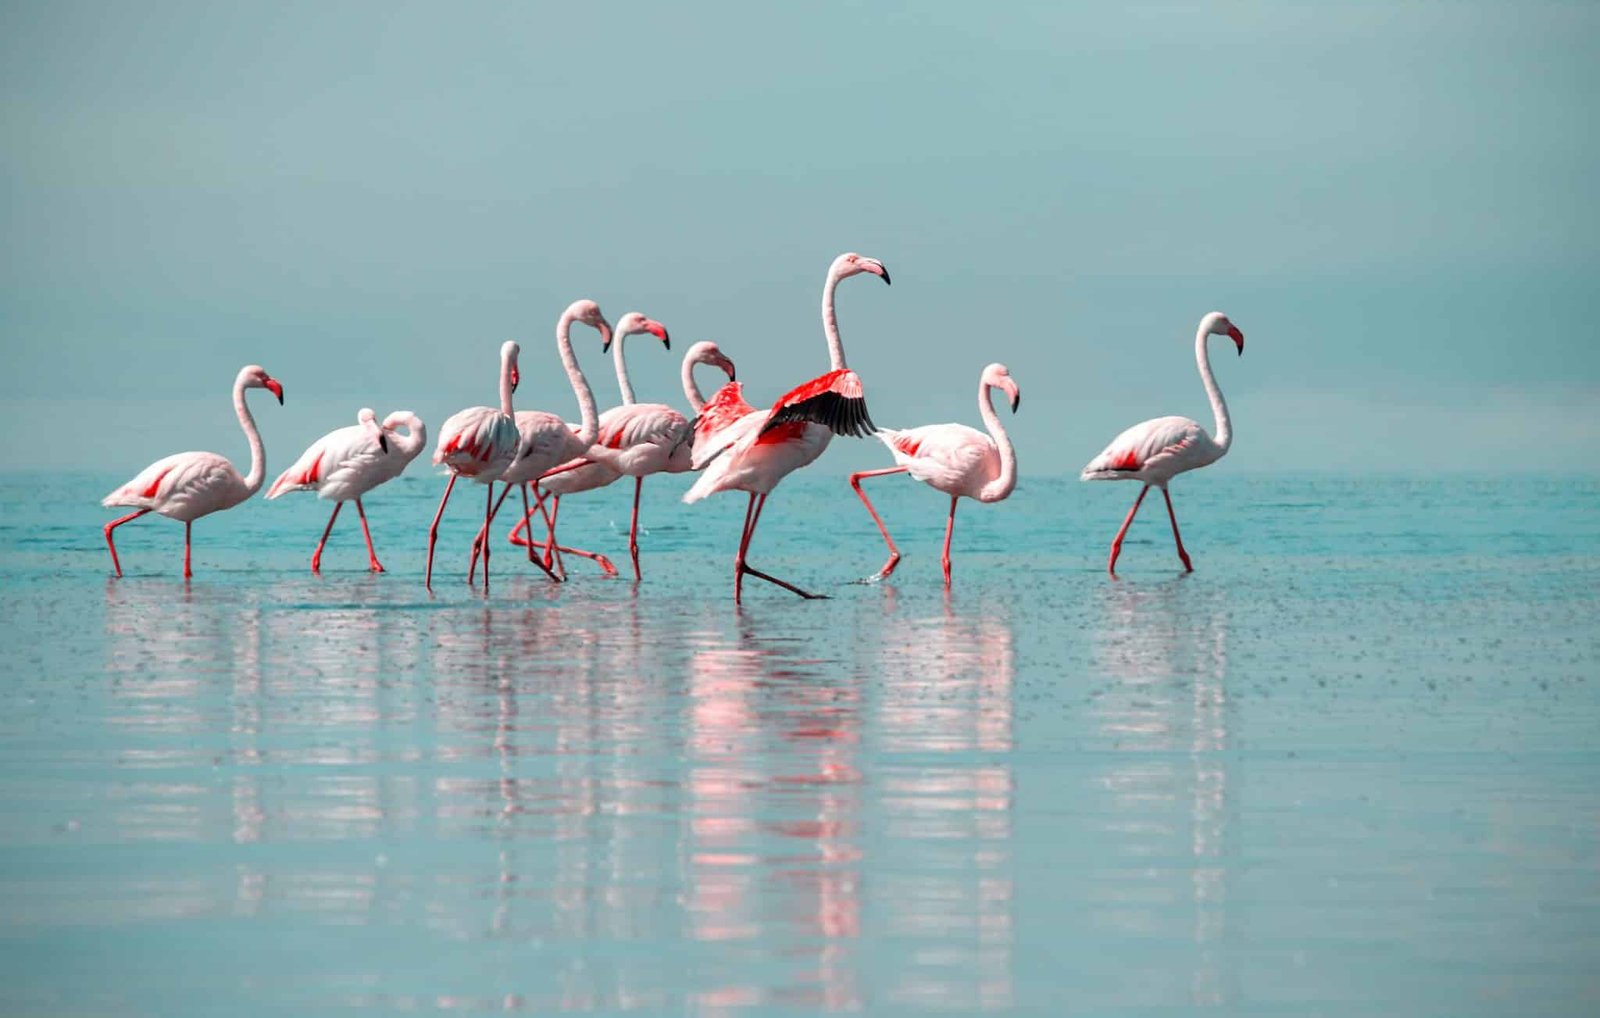 Wild birds. Group birds of pink flamingos walking around the blue lagoon on a sunny day